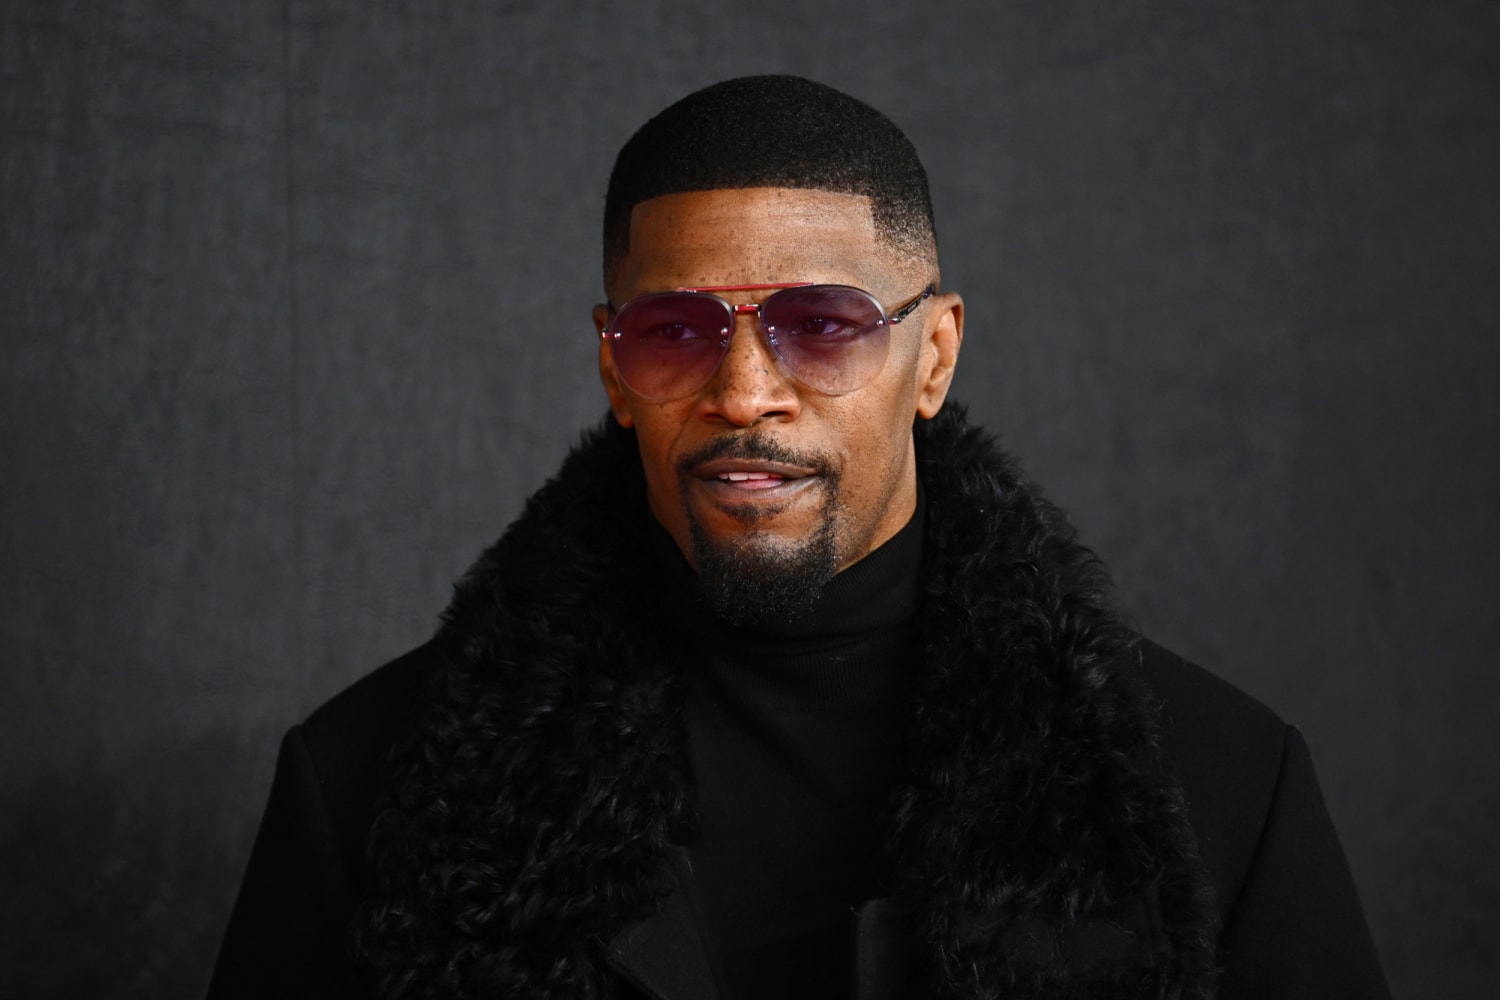 An unsubstantiated claim that Jamie Foxx was hospitalized after a Covid vaccination is going viral